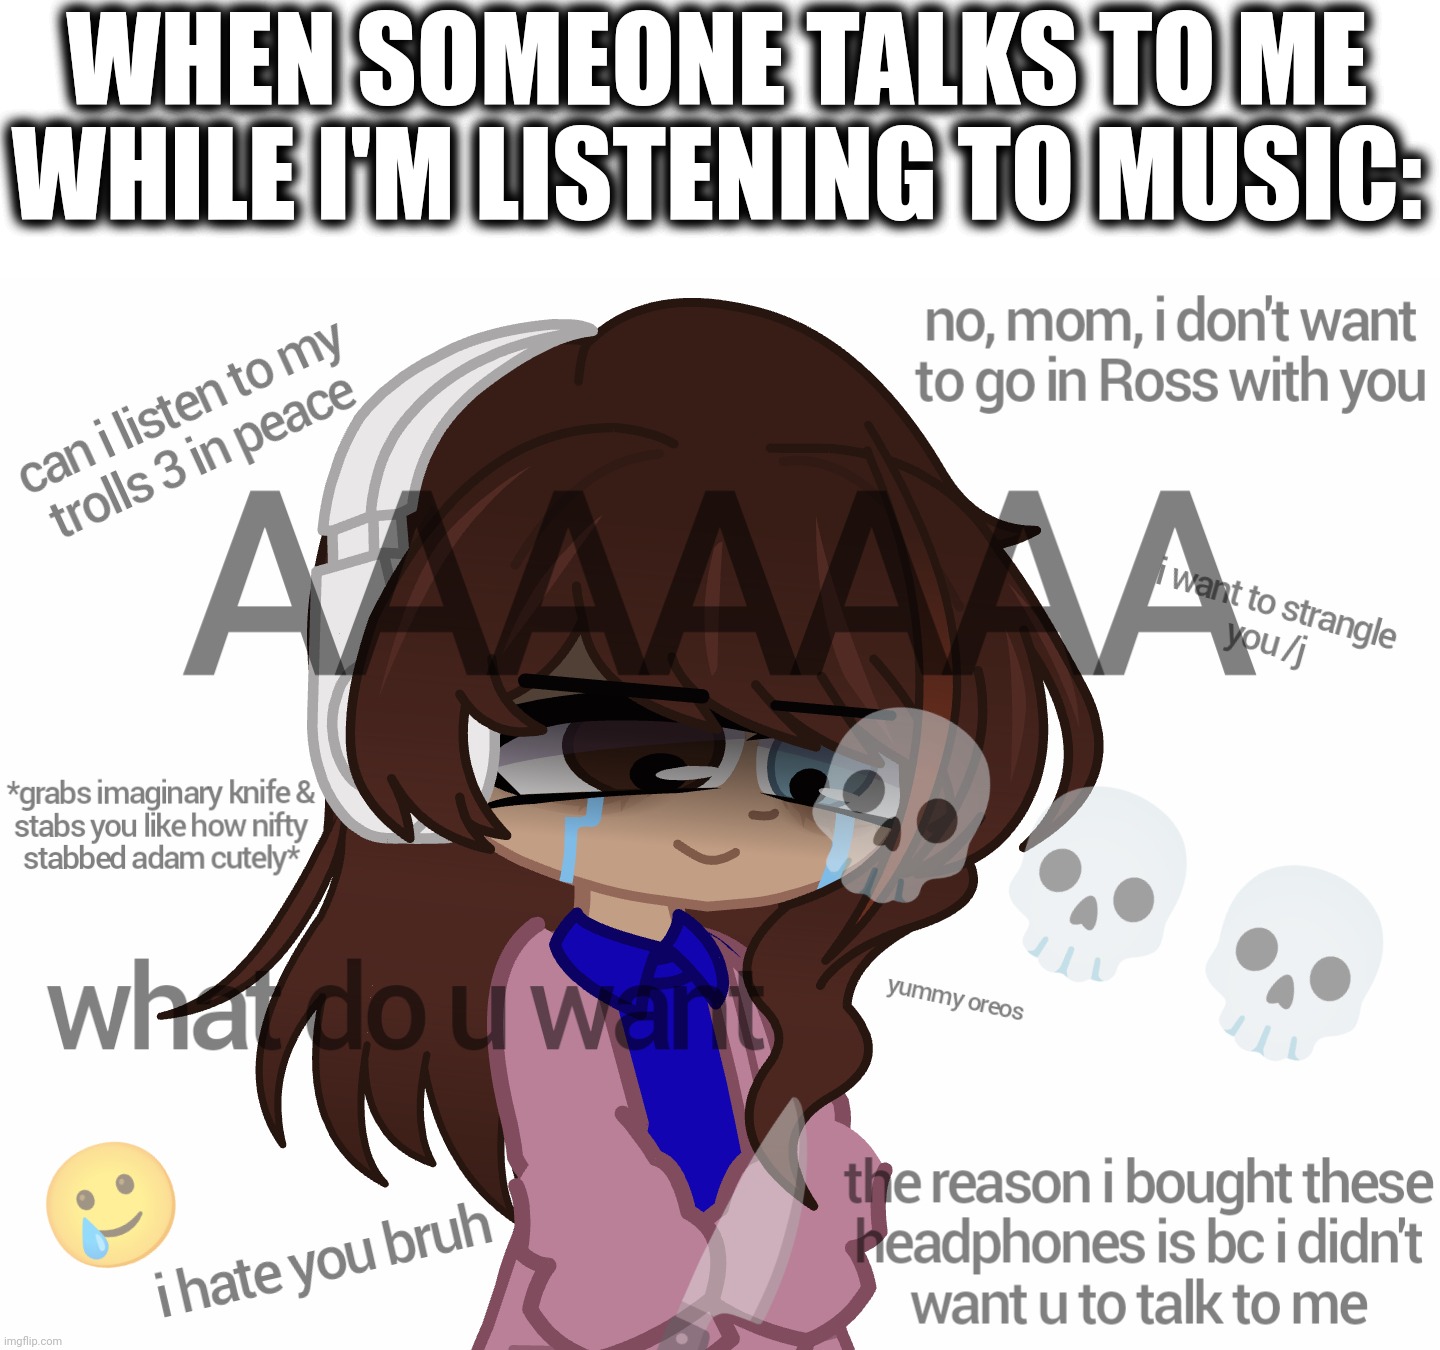 this has probably happened to you multiple times, admit it | WHEN SOMEONE TALKS TO ME WHILE I'M LISTENING TO MUSIC: | image tagged in relatable memes,headphones,music,there's a hazbin hotel reference,it's there,hehehe | made w/ Imgflip meme maker